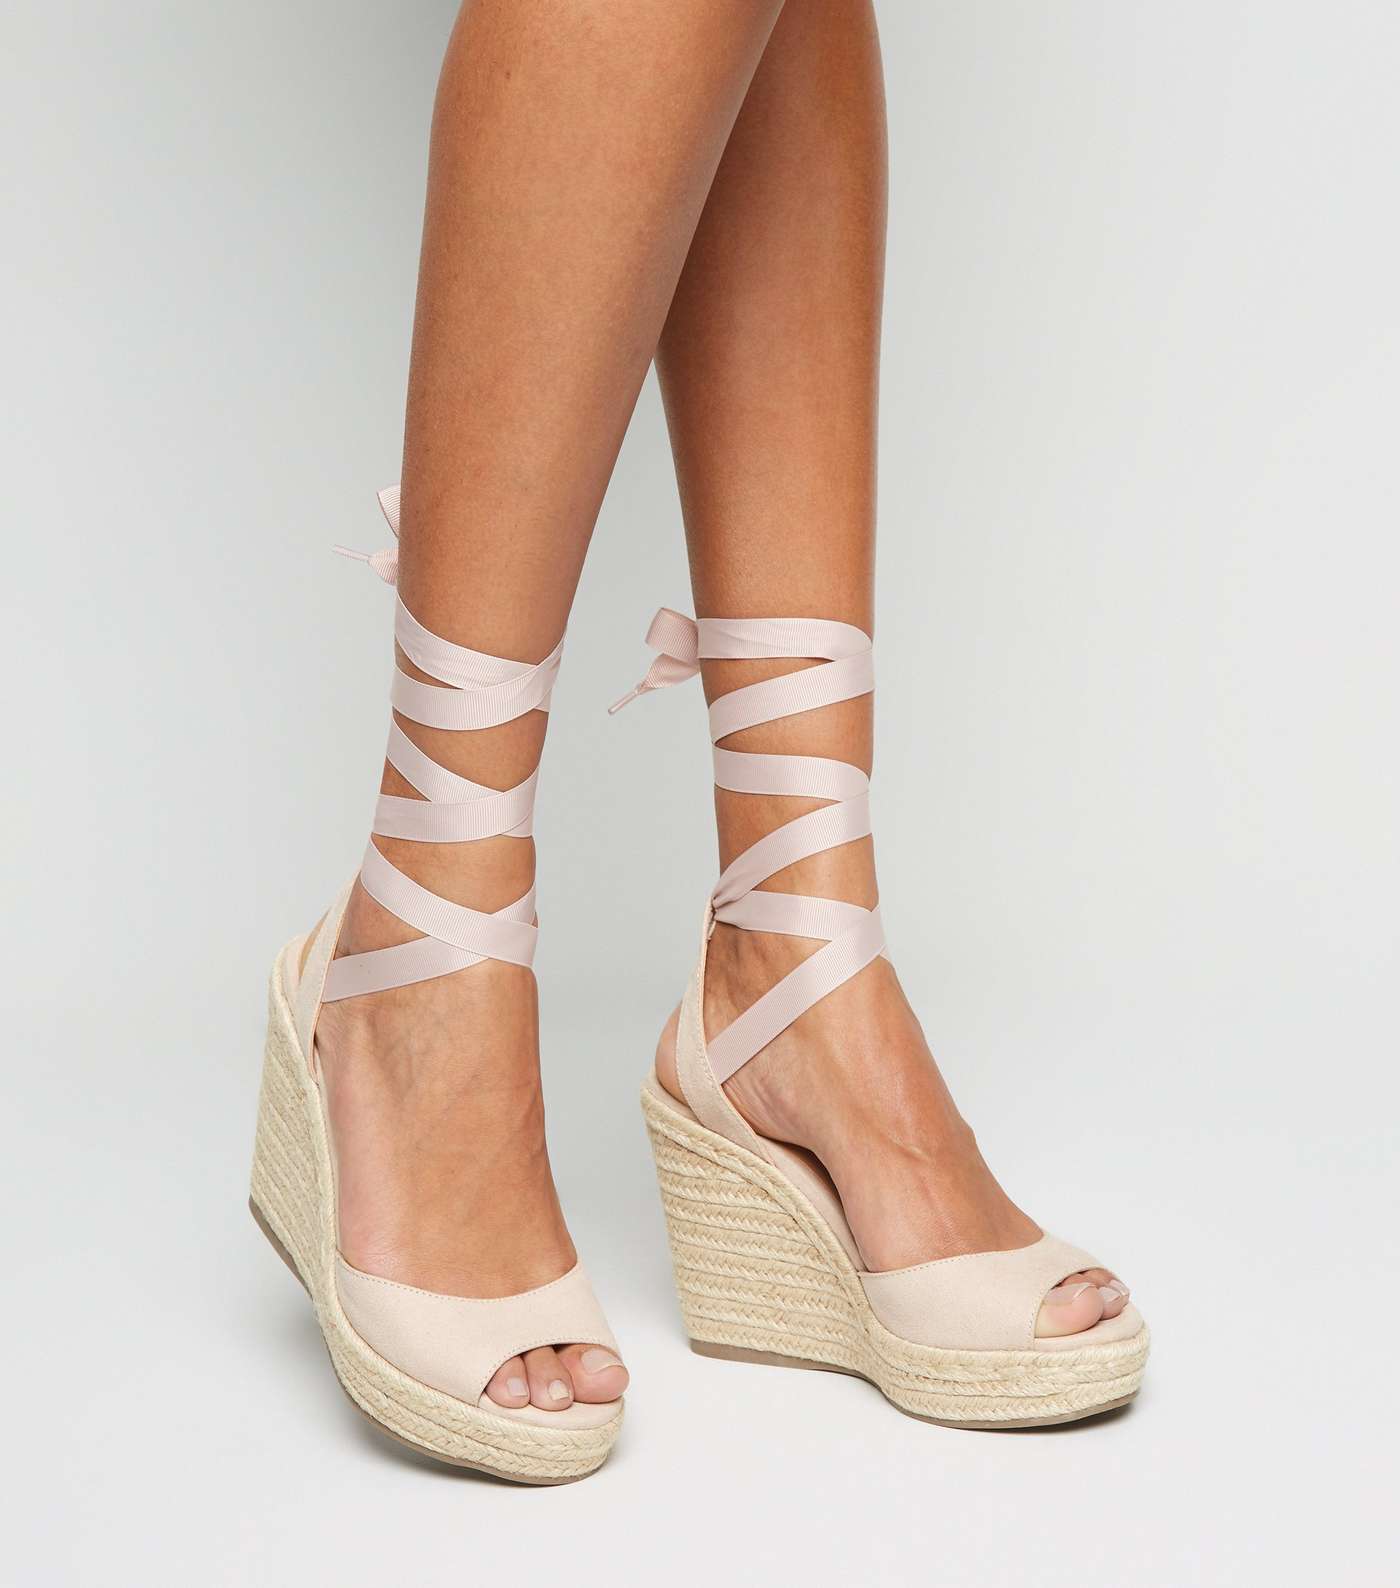 Pale Pink Suedette Ankle Tie Woven Espadrille Wedges Image 2